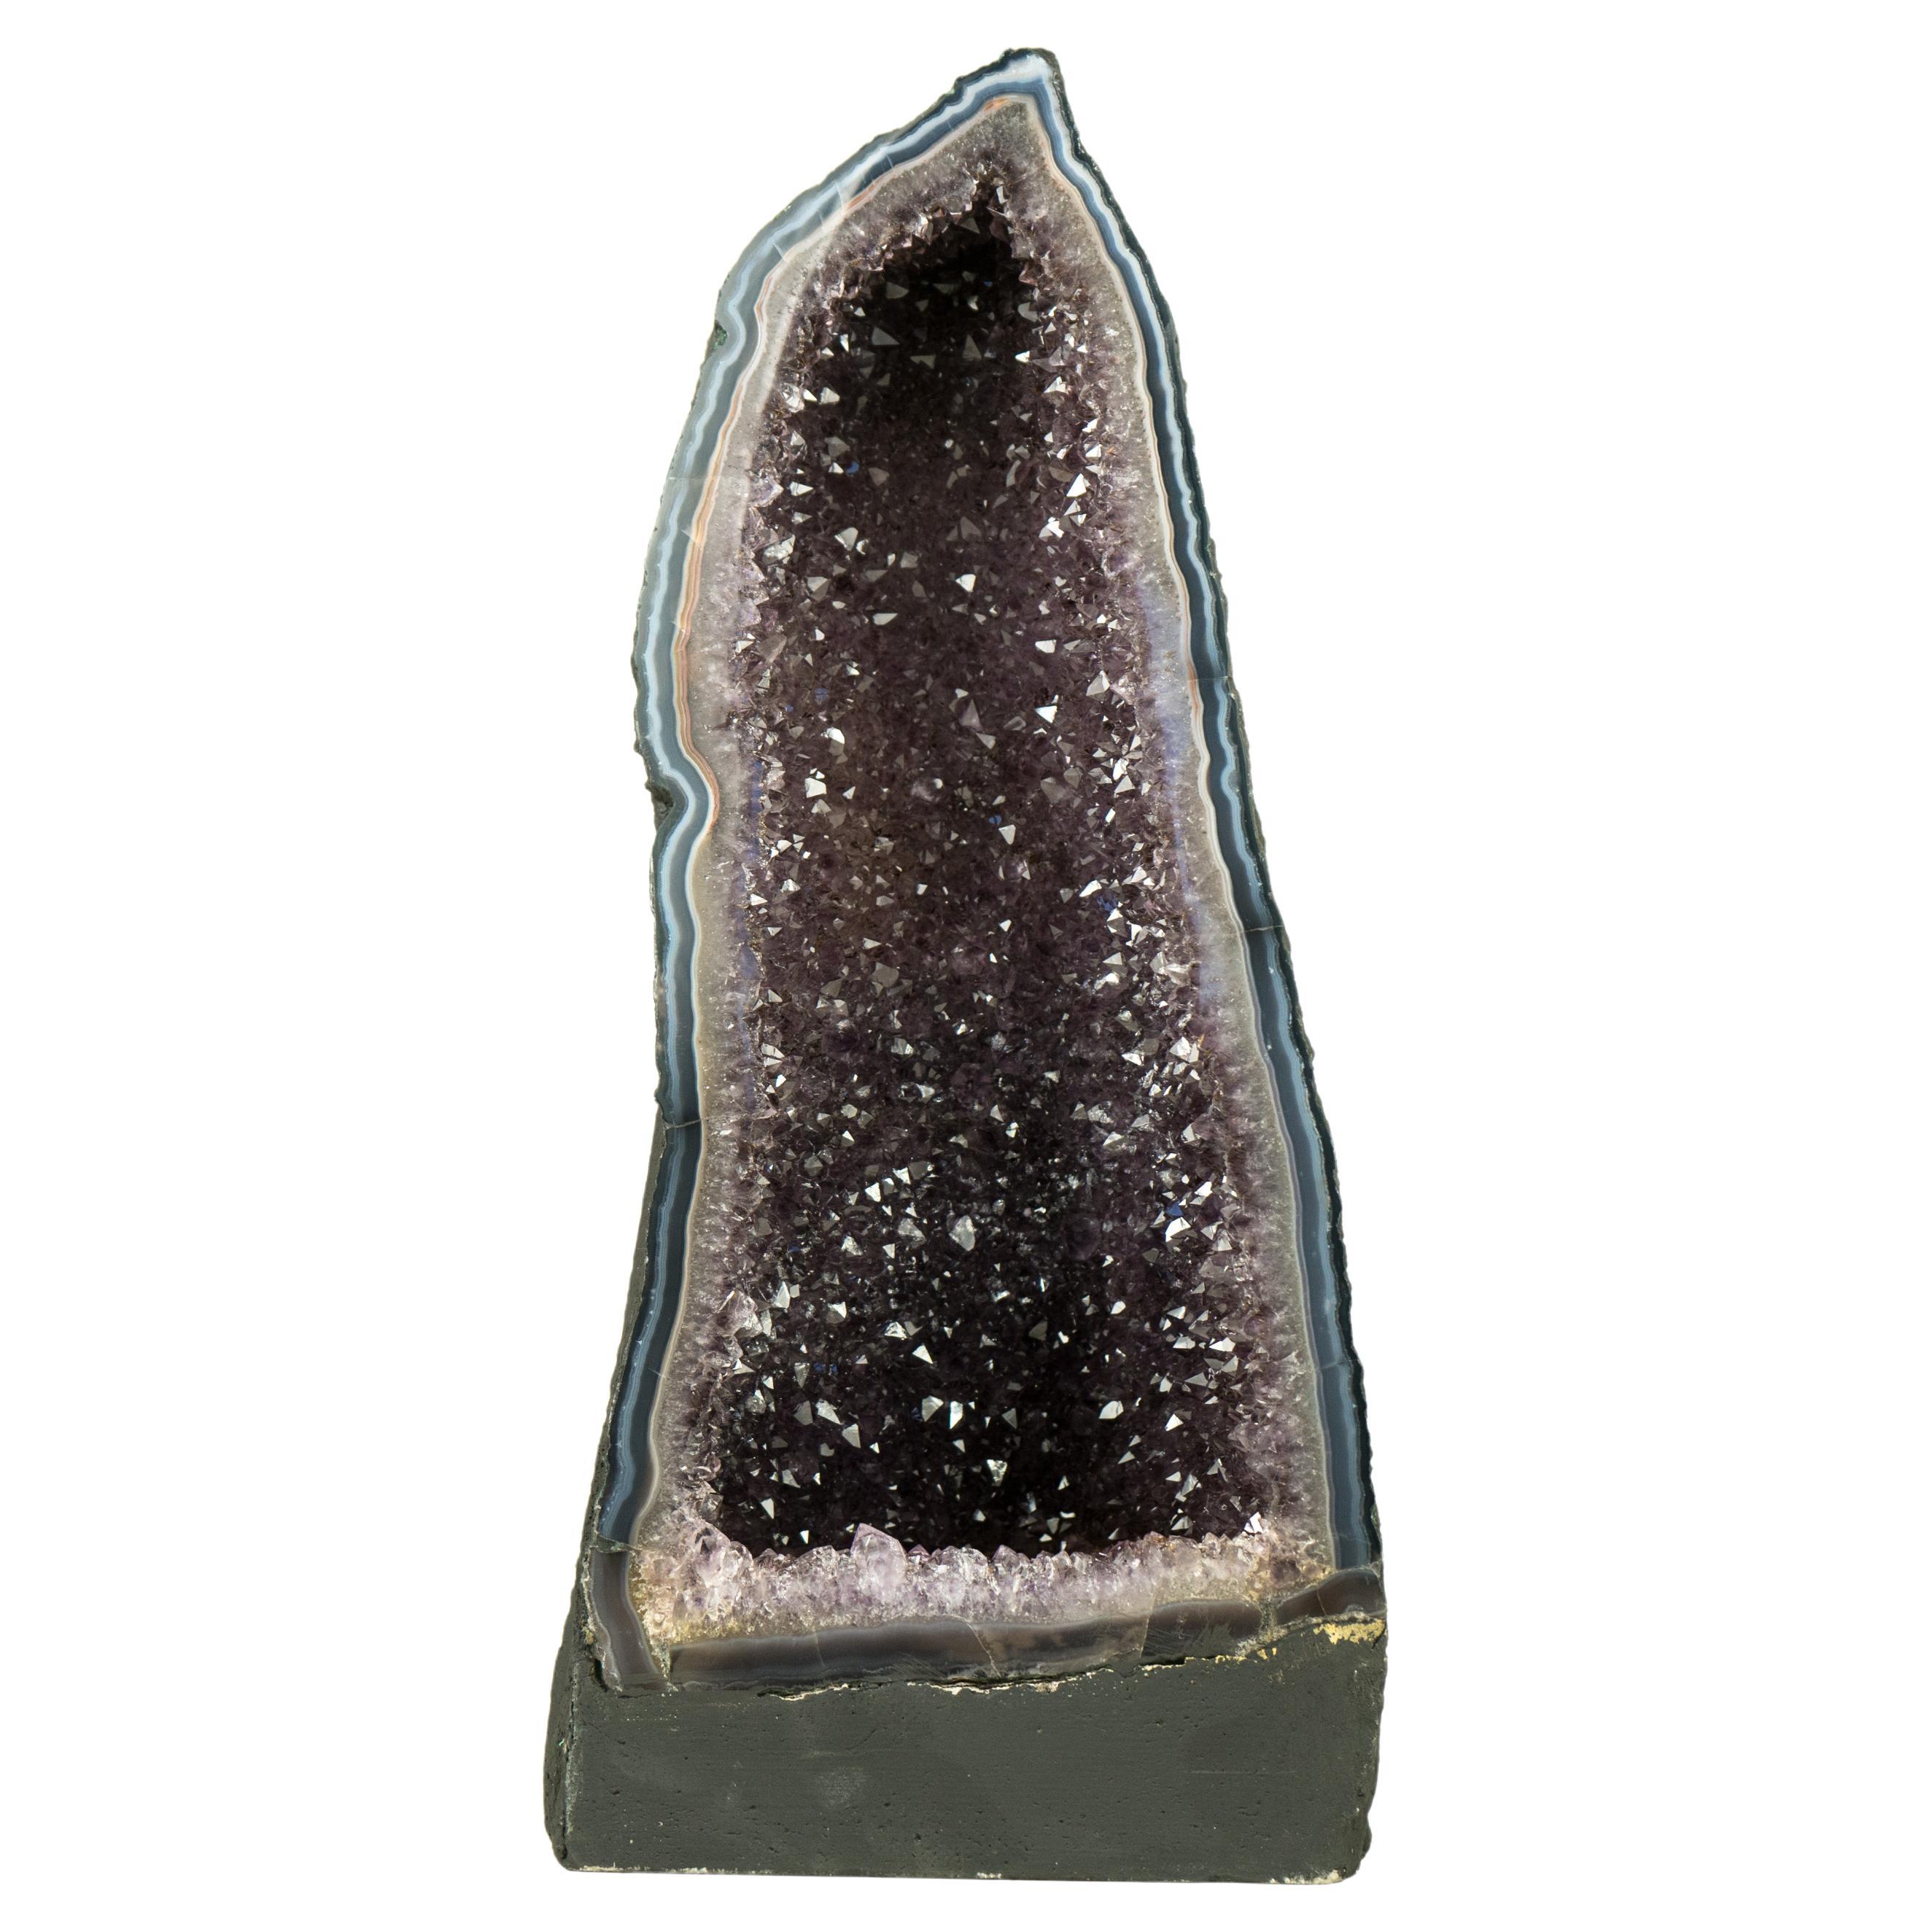 Natural Blue Lace Agate Geode with Sparkly Lavender Amethyst, Decor Centerpiece